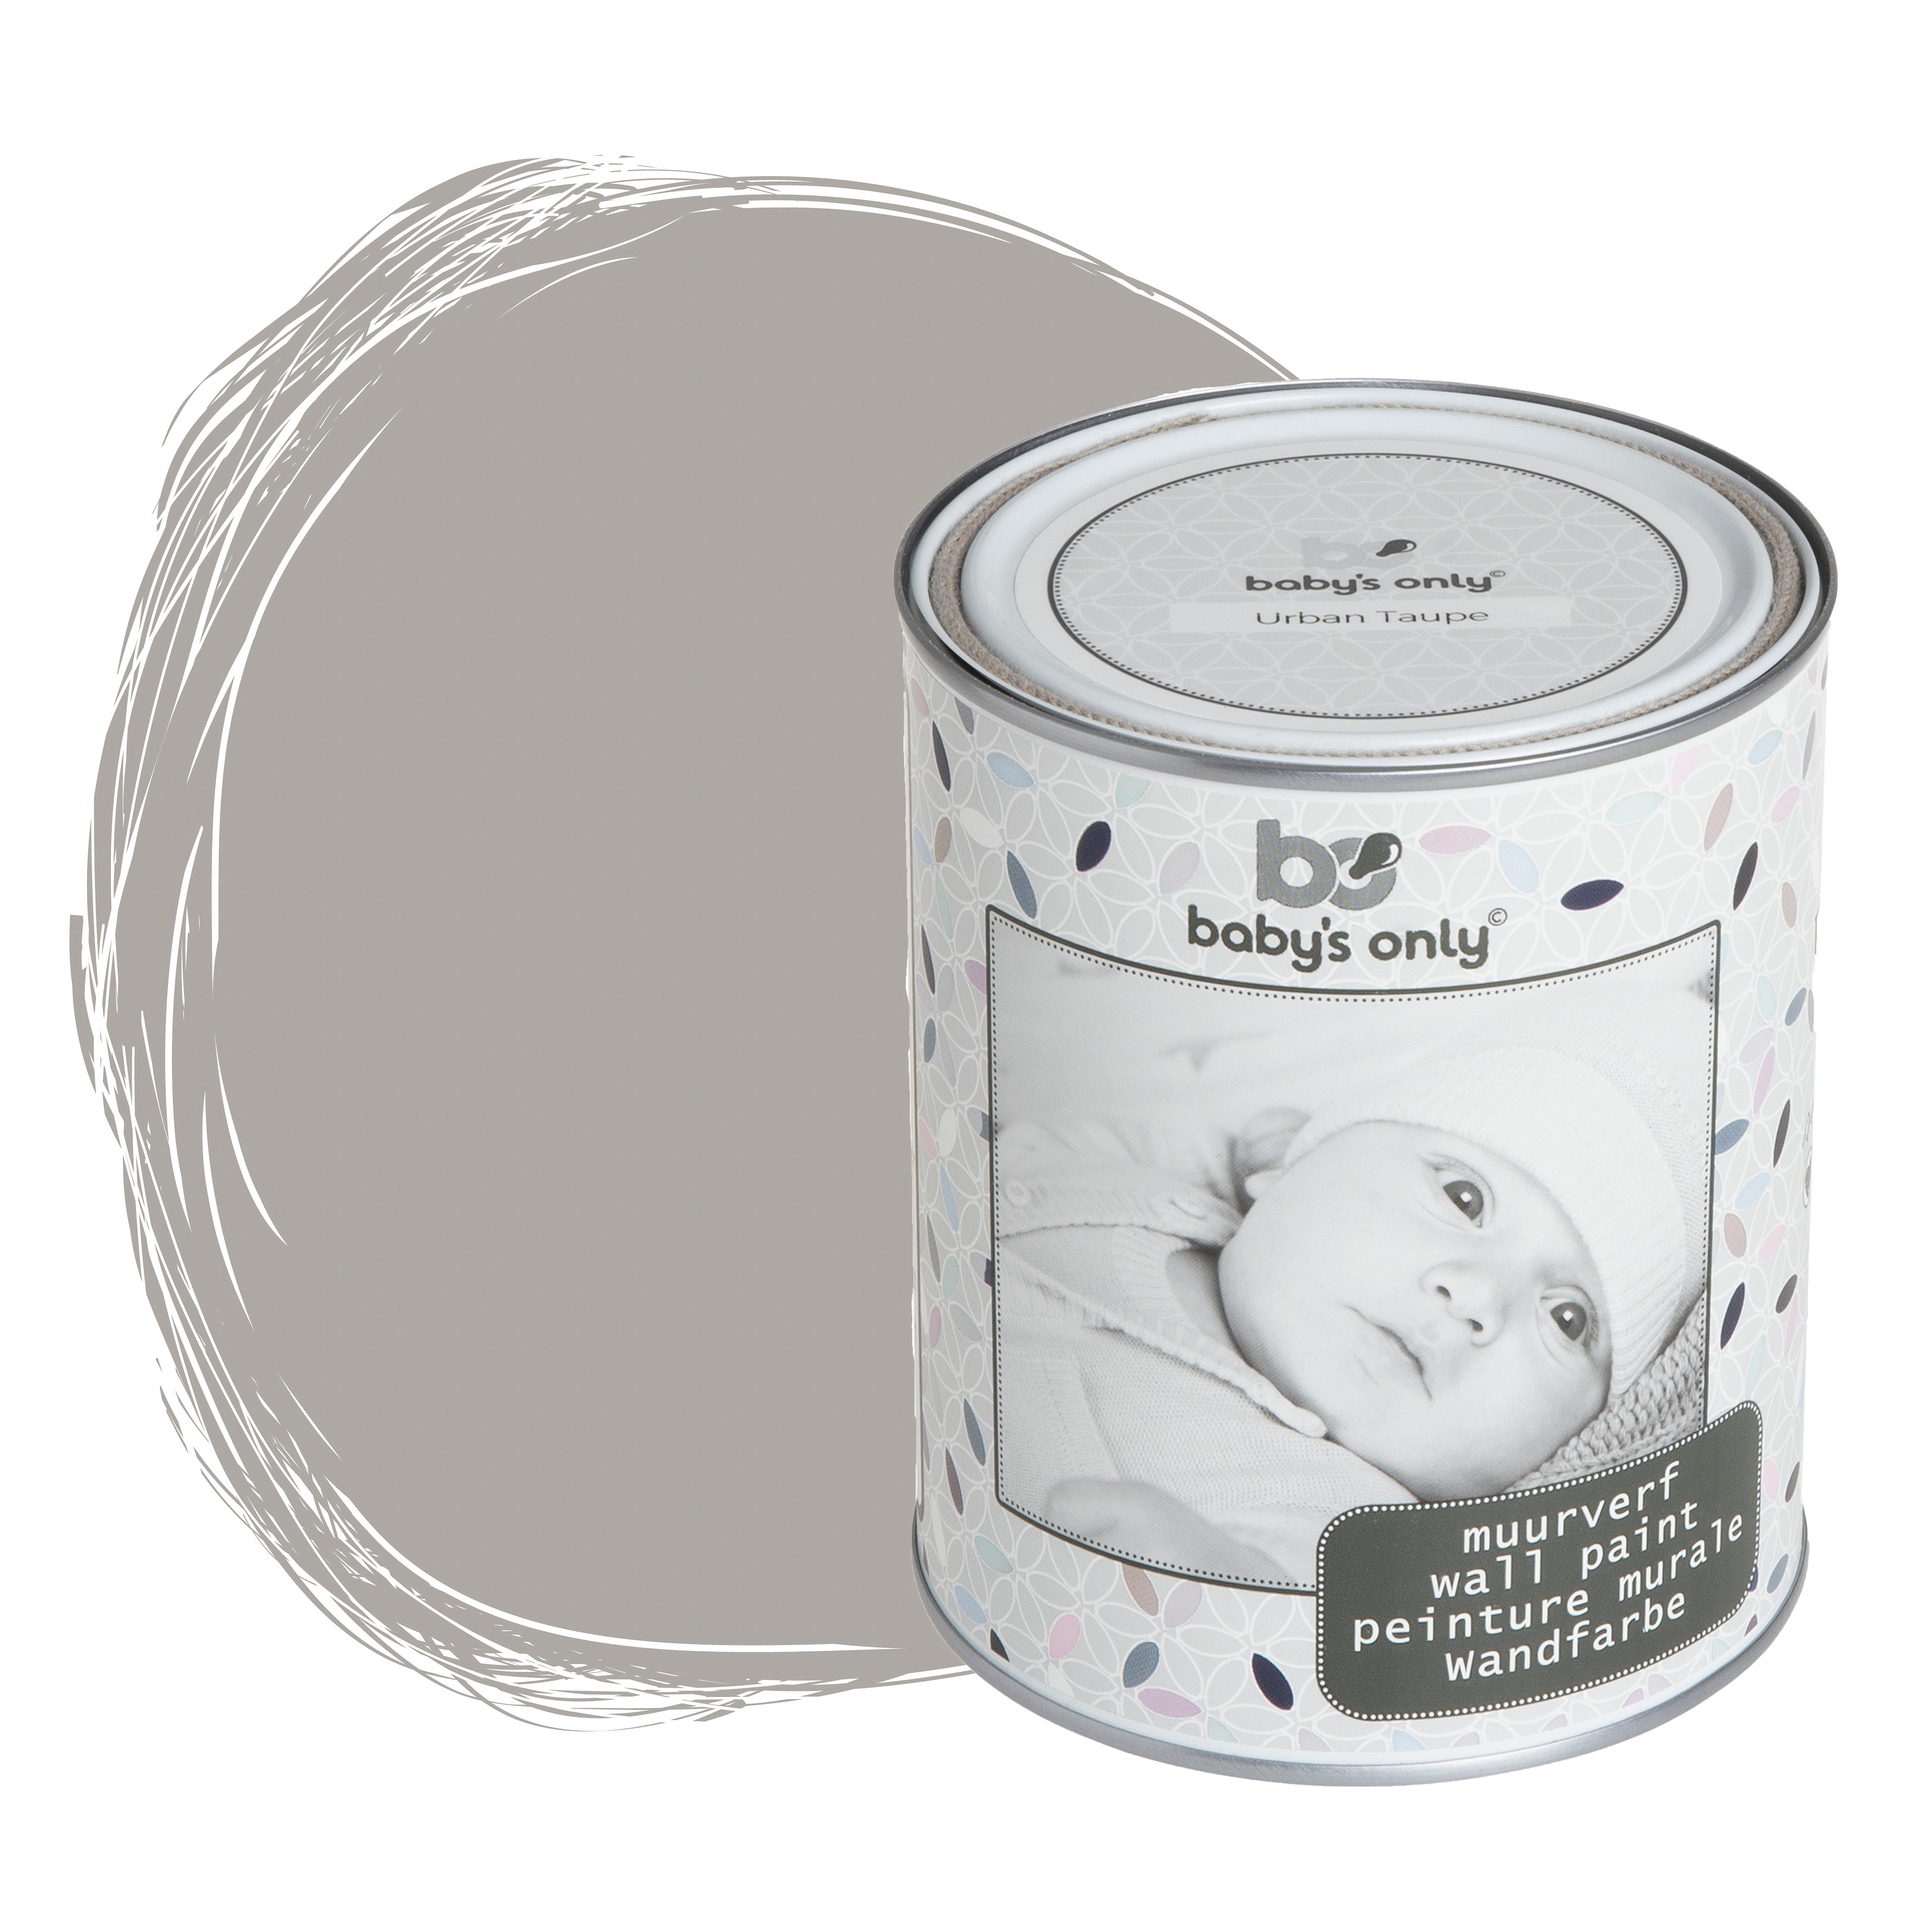 Wall paint urban taupe - 1 liter